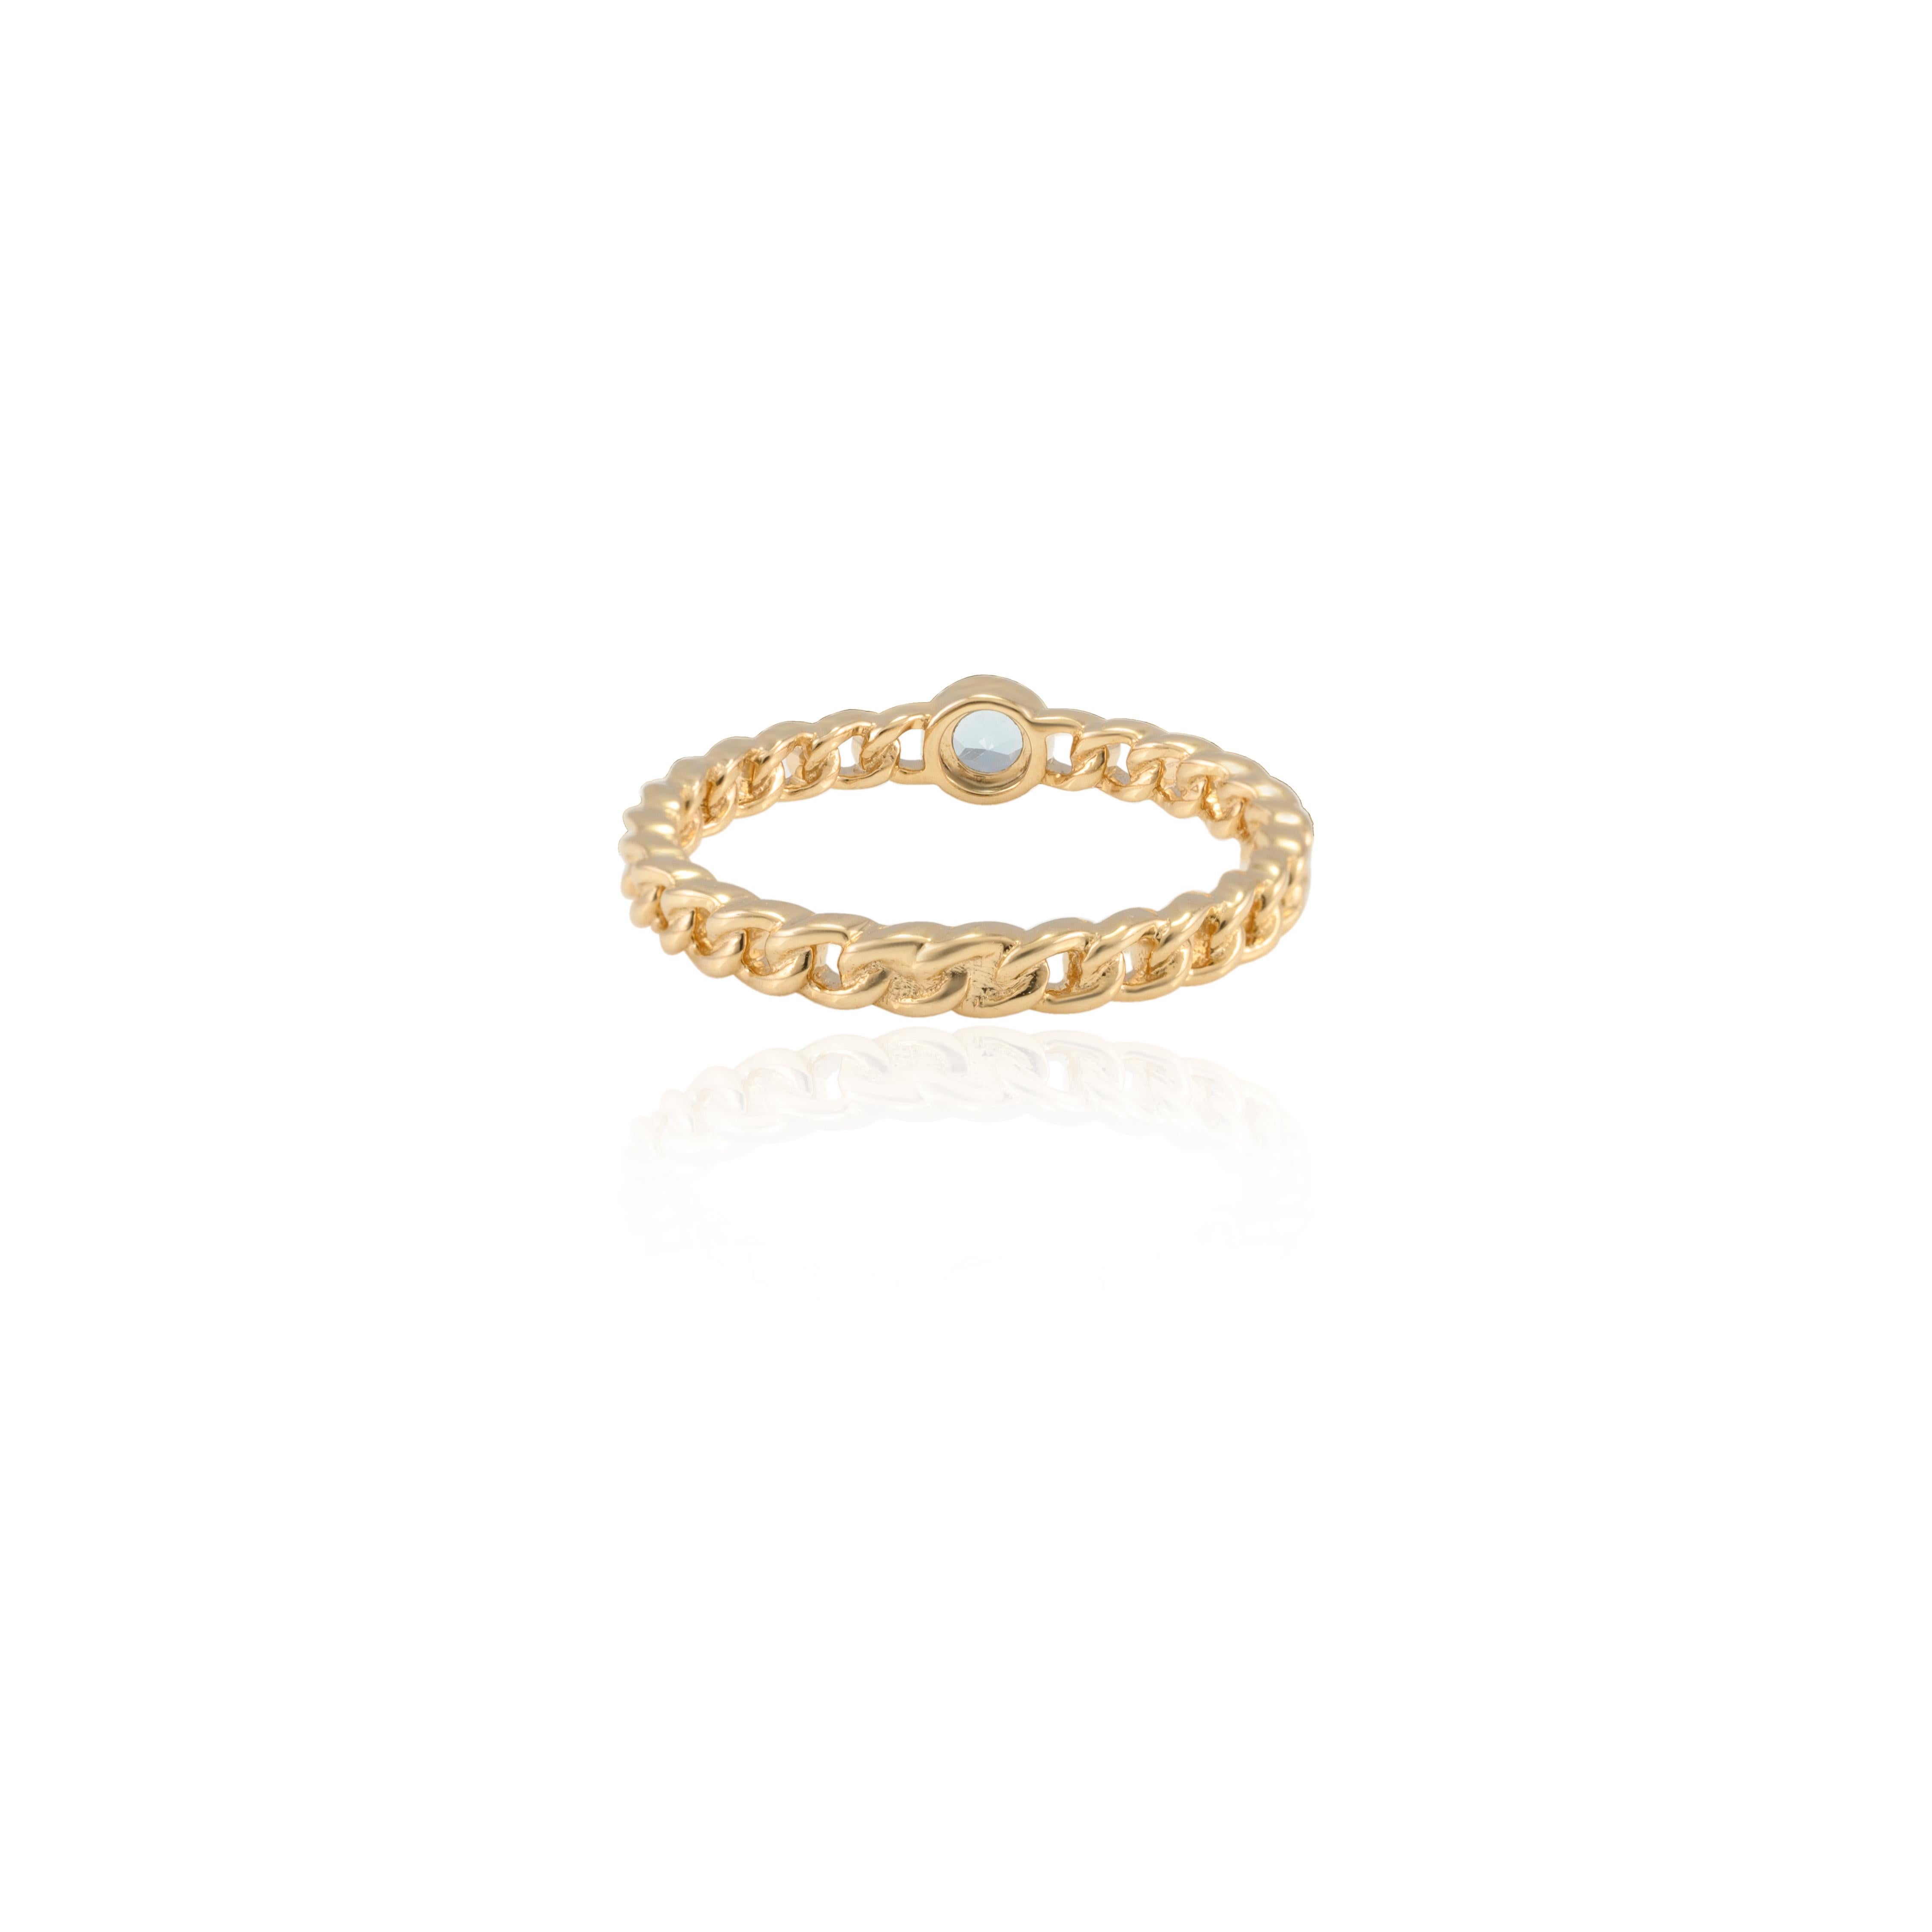 For Sale:  Everyday Blue Topaz Solitaire Curb Chain Ring in 14k Solid Yellow Gold For Her 6